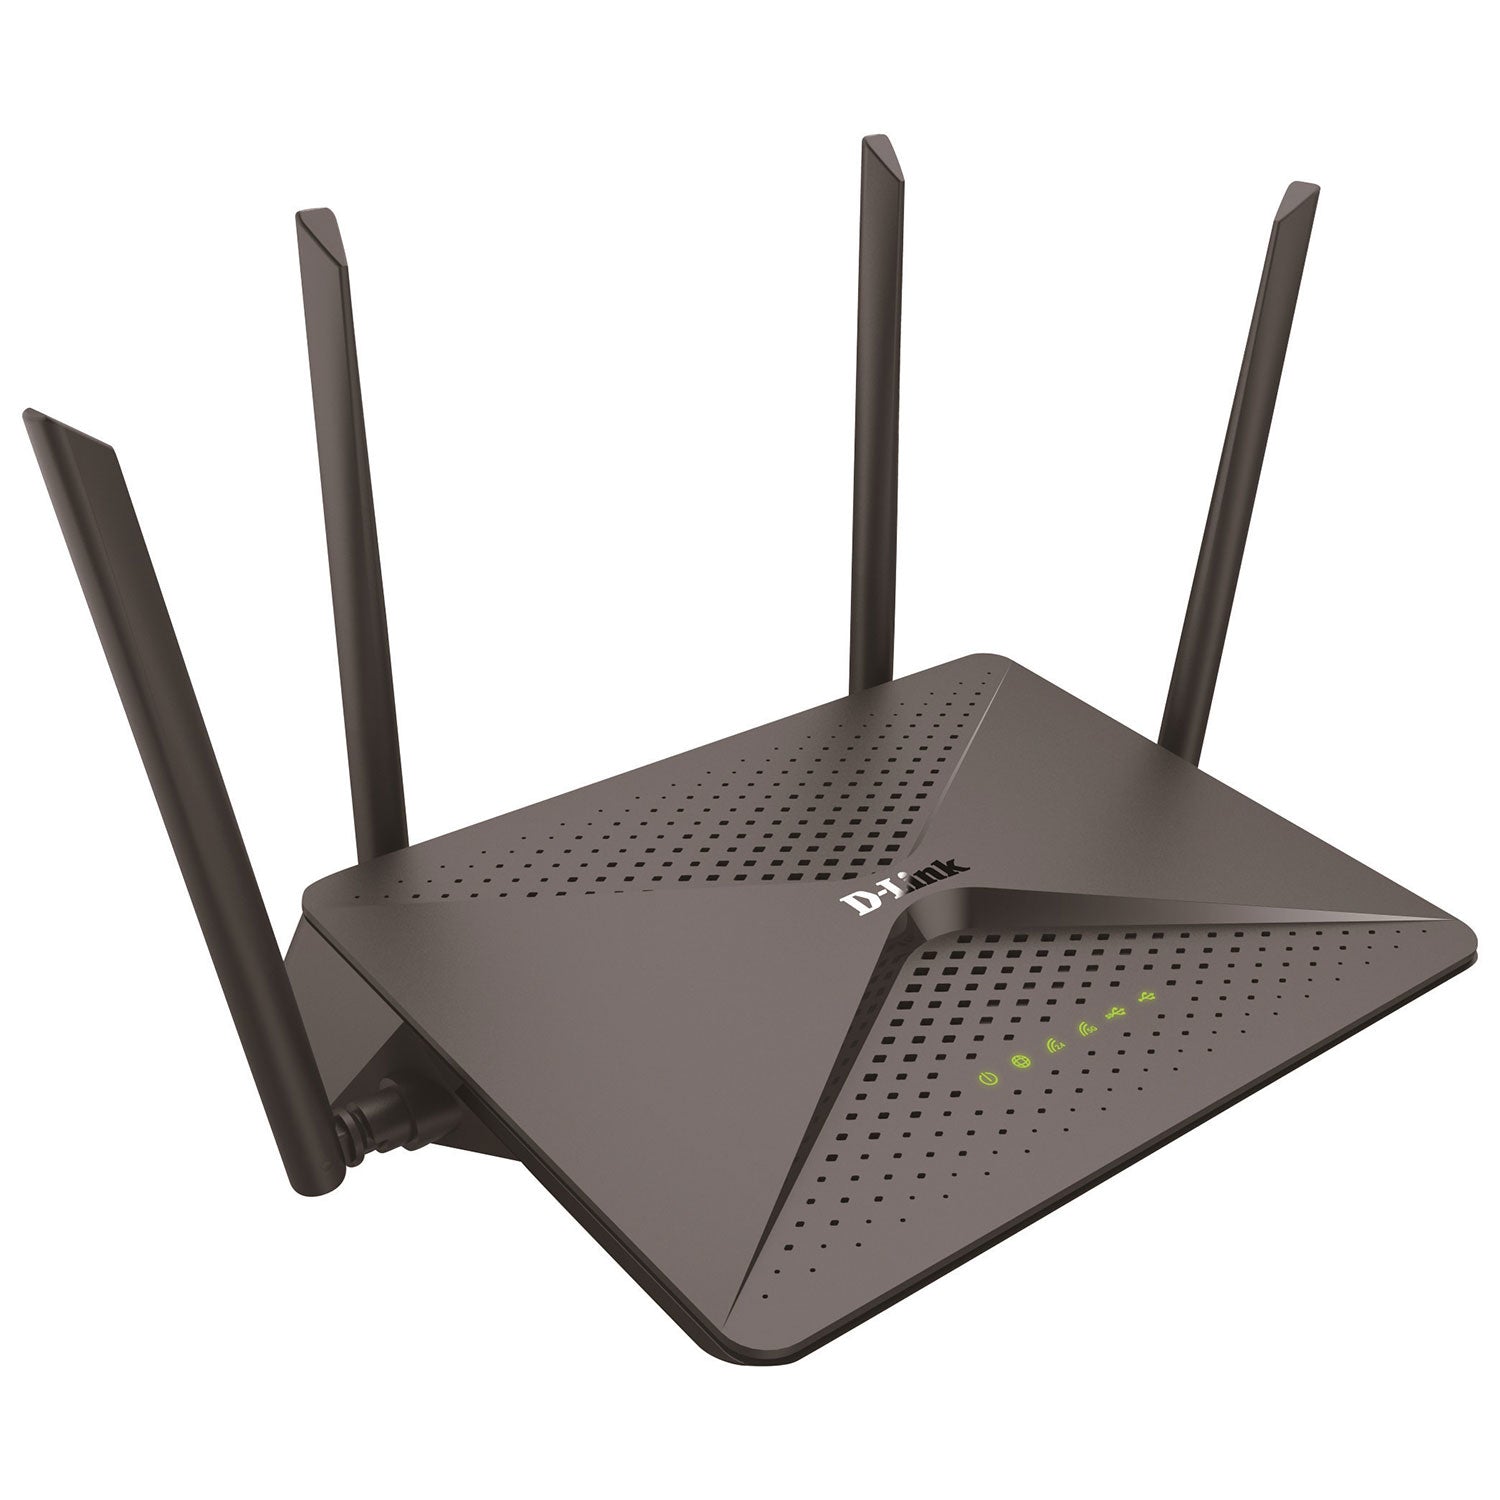 Wireless AC2600 Dual Band  AC Router 2.4GHz and 5GHz Concurrent (DIR-882/ESG)